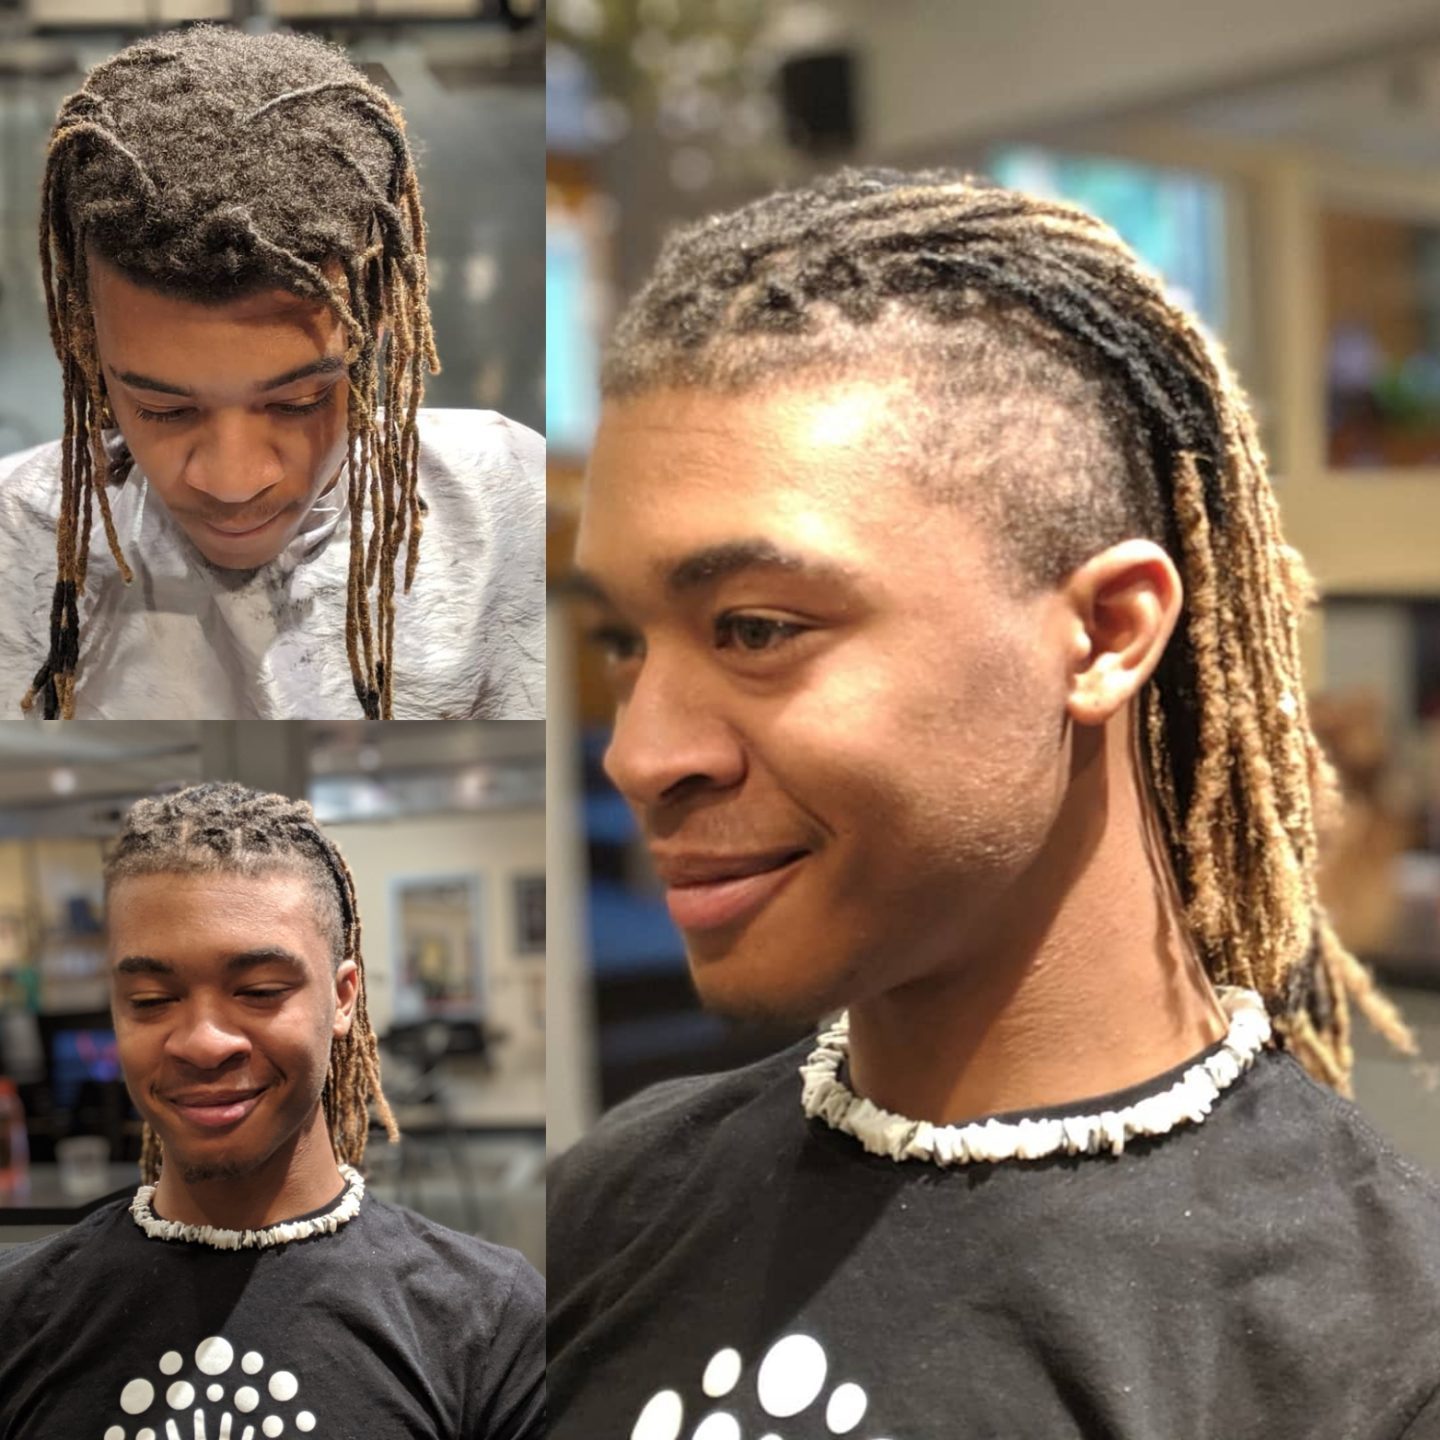 Before and after dreadlocks